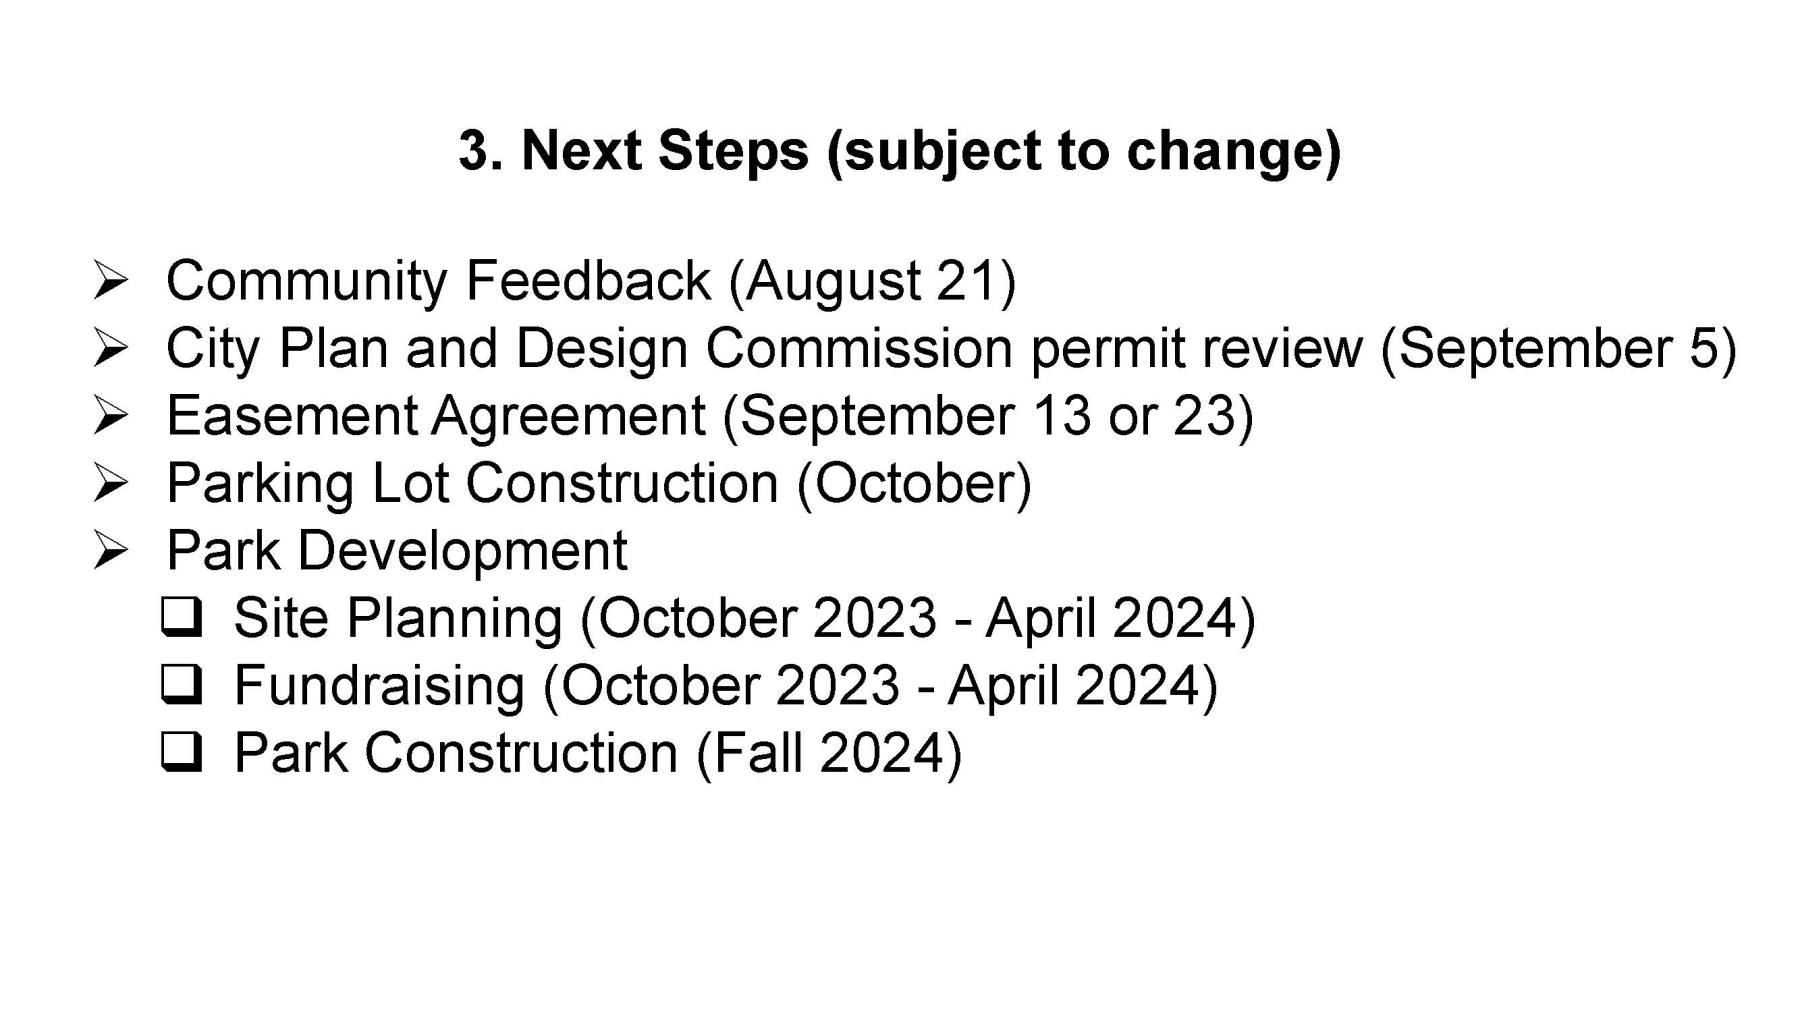 Next Steps (subject to change)